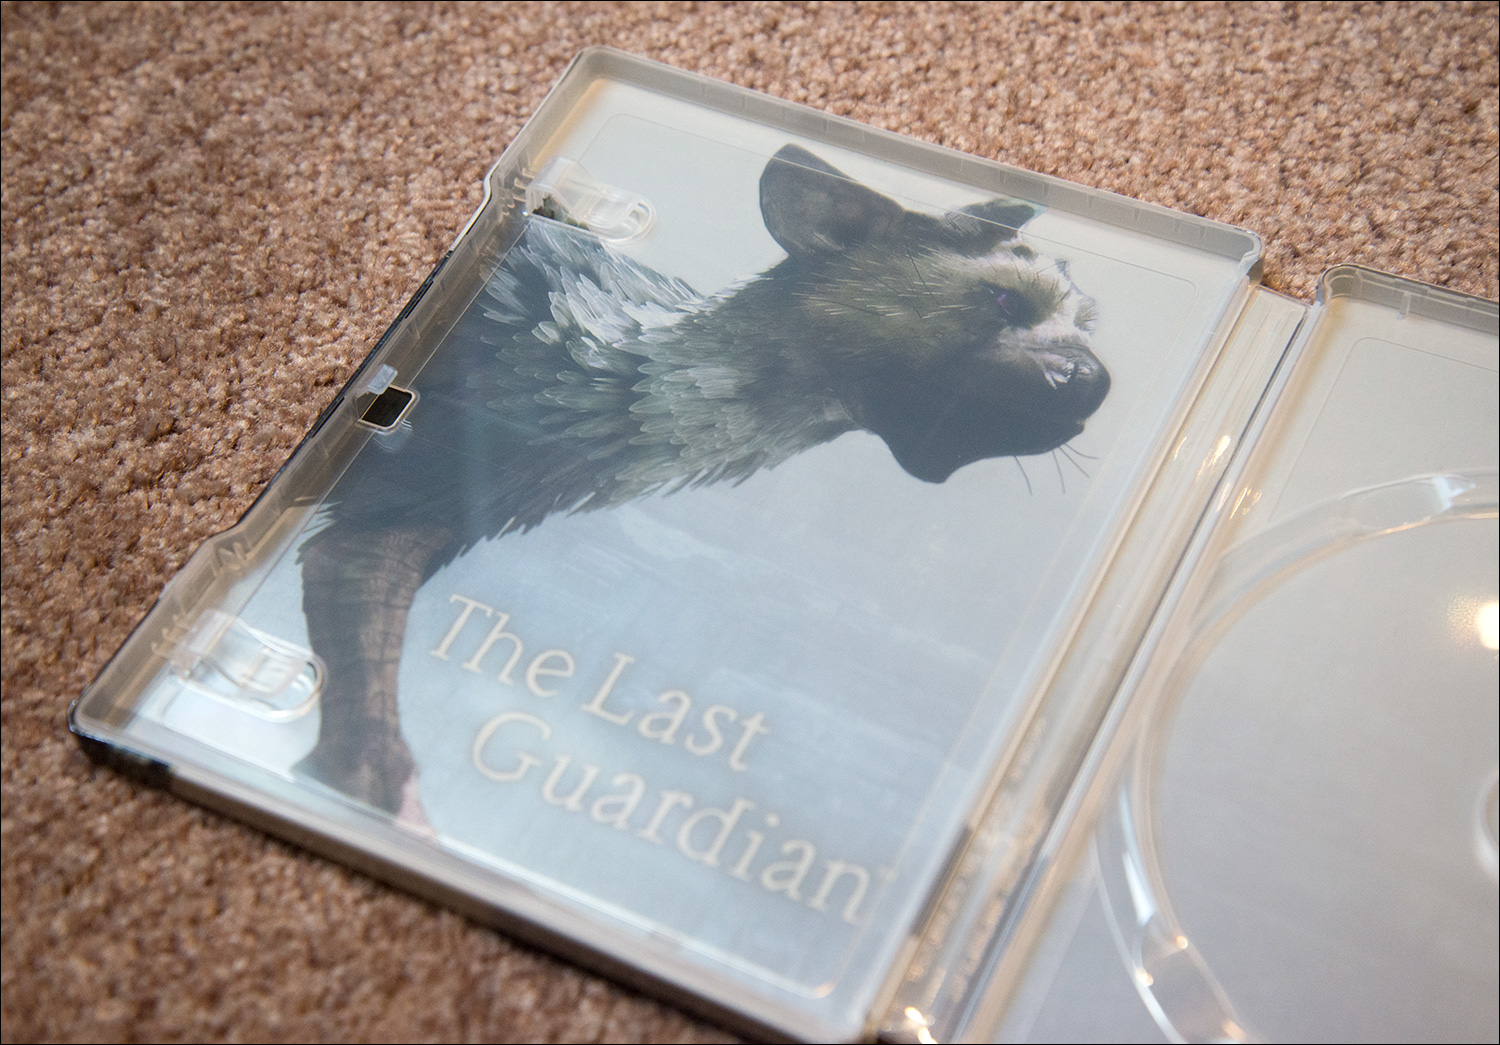 Unboxing The Last Guardian: Collectors Edition 